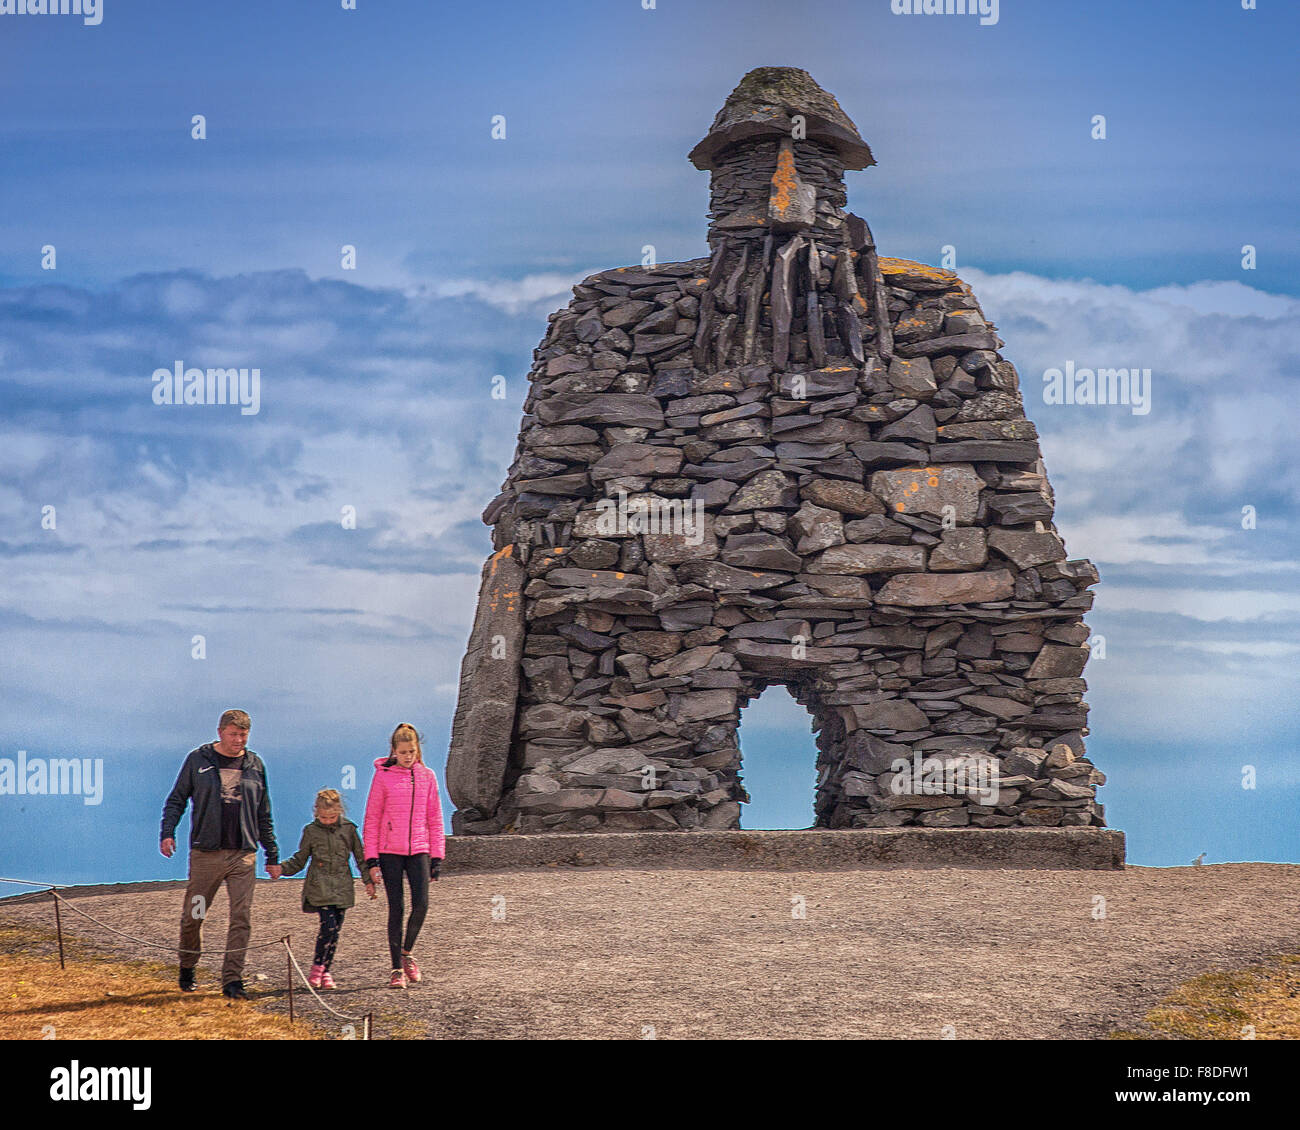 Arnarstapi, Snaefellsnes Peninsula, Iceland. 30th July, 2015. A visitor and his two daughters at the huge stone structure of Bardur SnaefellsÃ¡s at Arnarstapi on the Snaefellsnes peninsula in West Iceland. By sculptor Ragnar Kjartansson, it relates to a late Icelander saga with legendary elements dating to the early 14th century. It is a favorite tourist destination. © Arnold Drapkin/ZUMA Wire/Alamy Live News Stock Photo